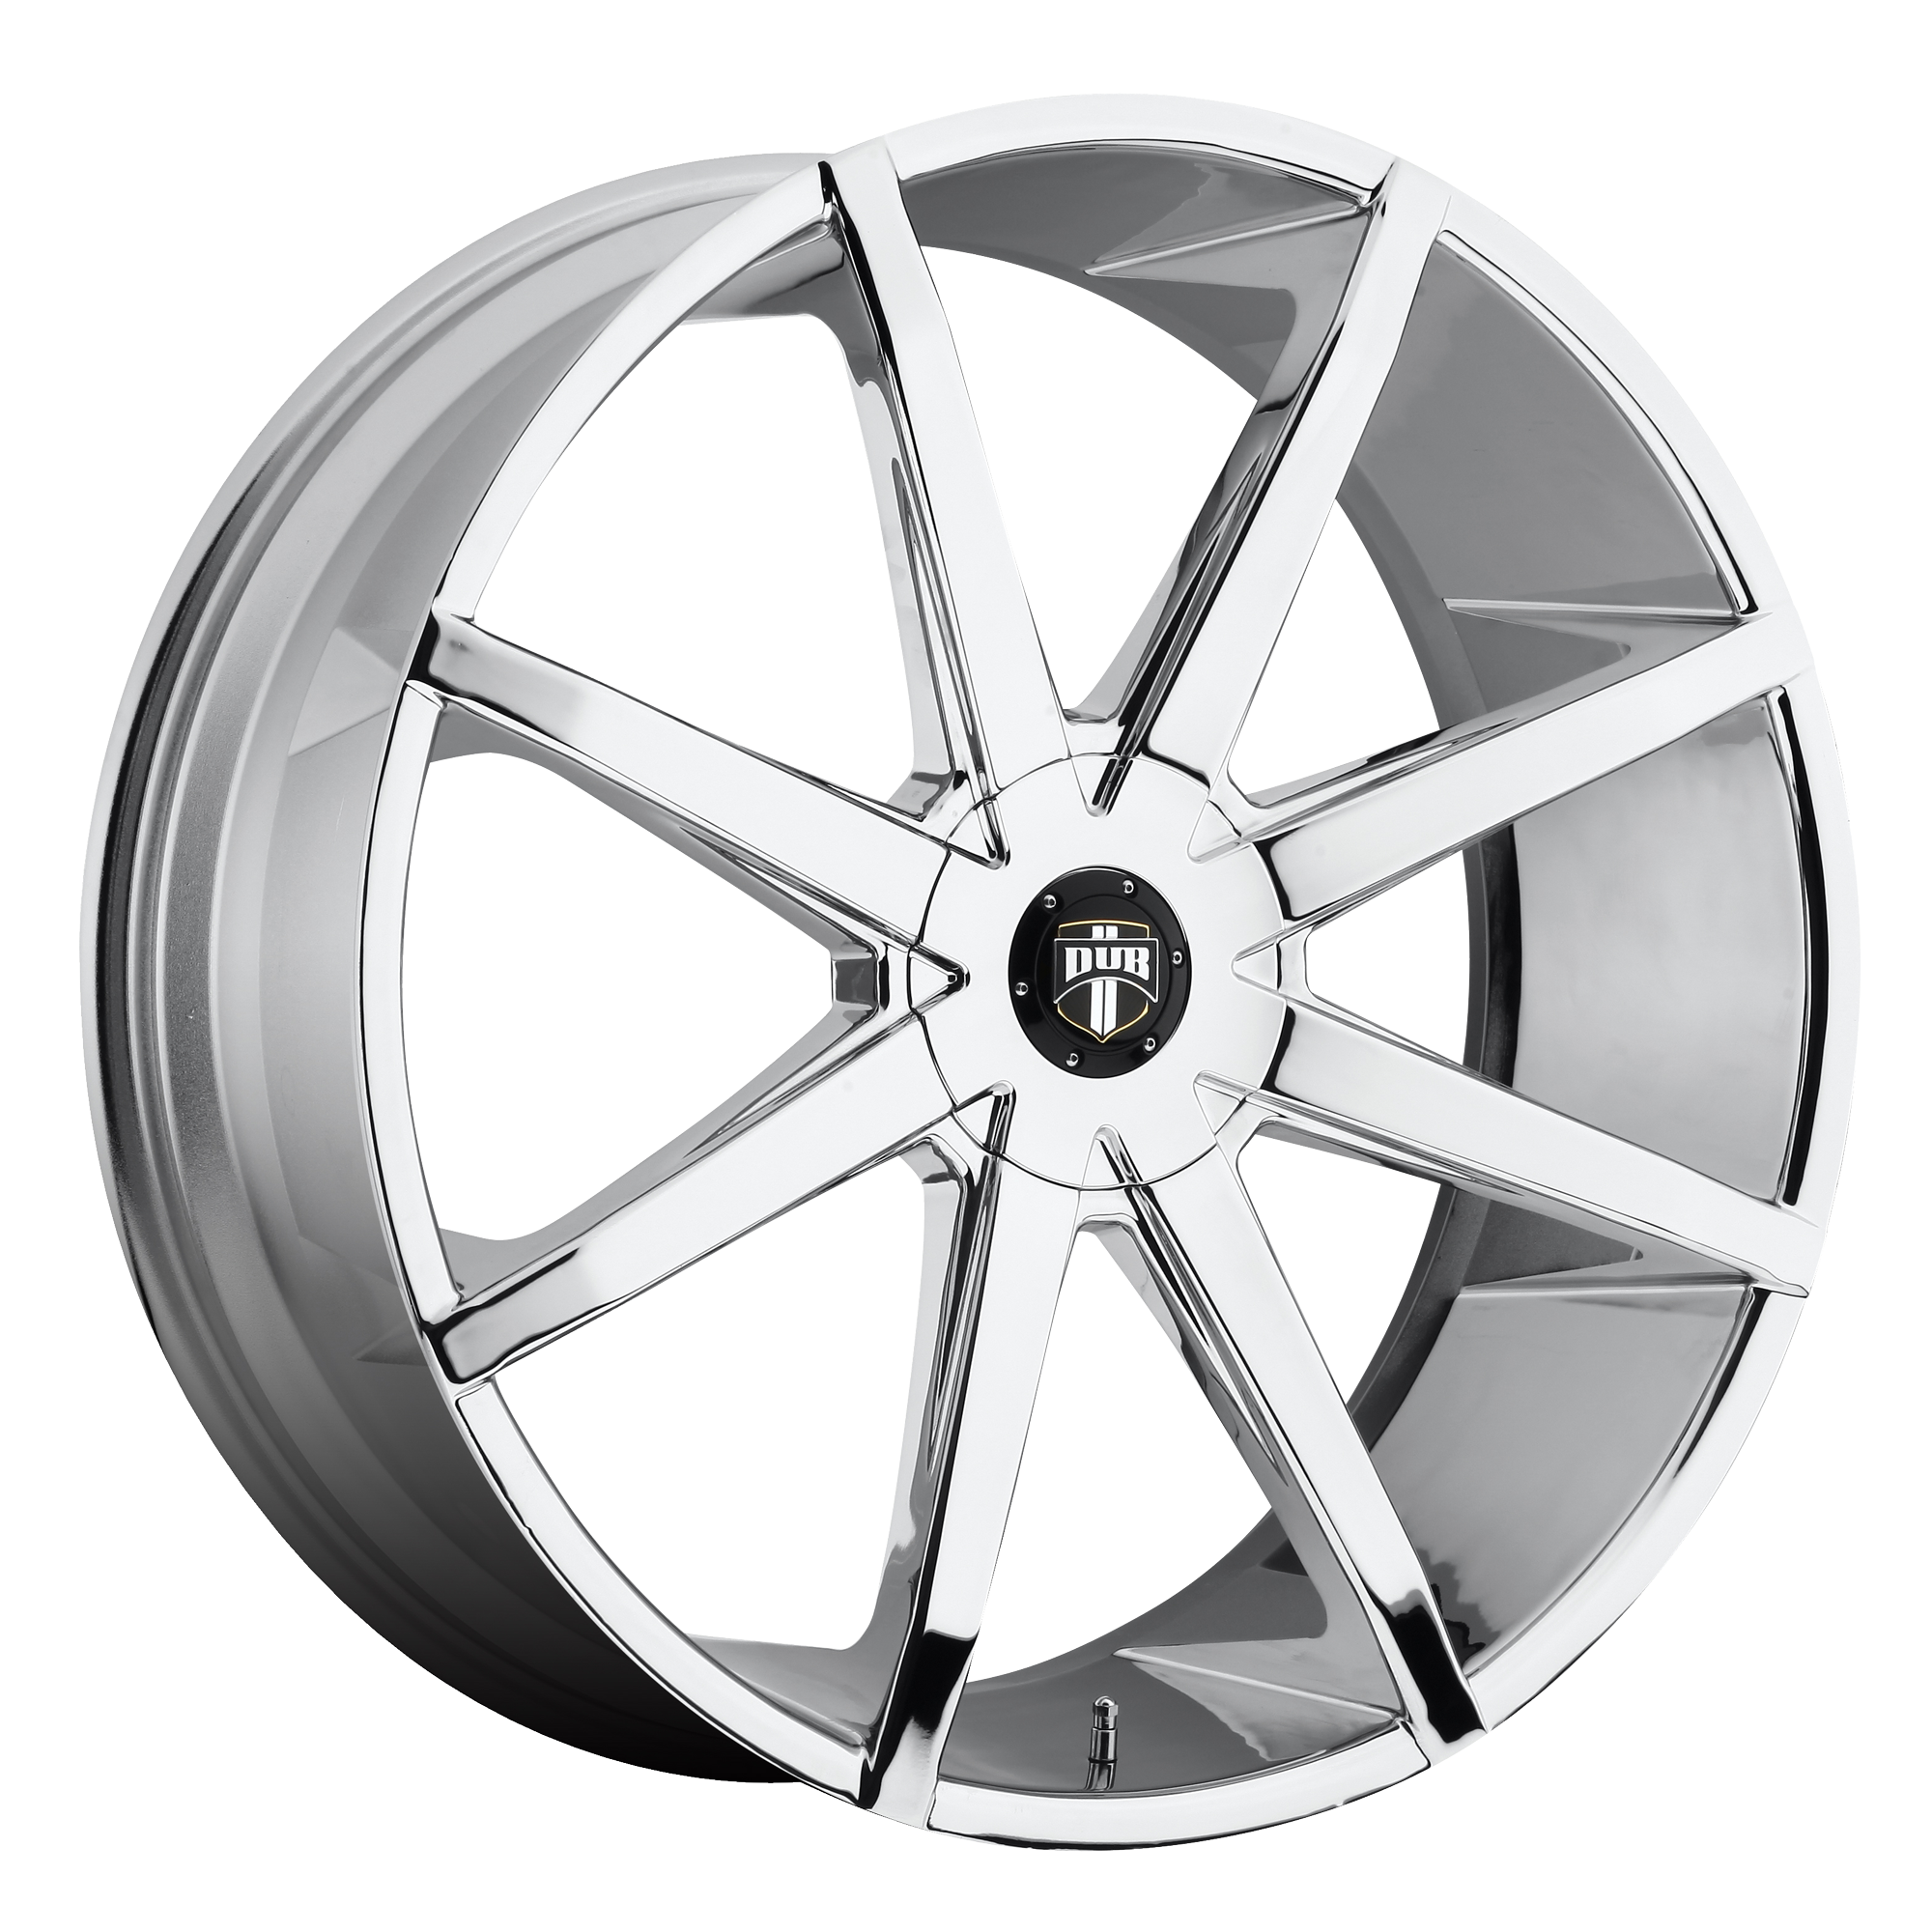 PUSH 24x9.5 6x135.00/6x139.70 CHROME PLATED (25 mm) - Tires and Engine Performance